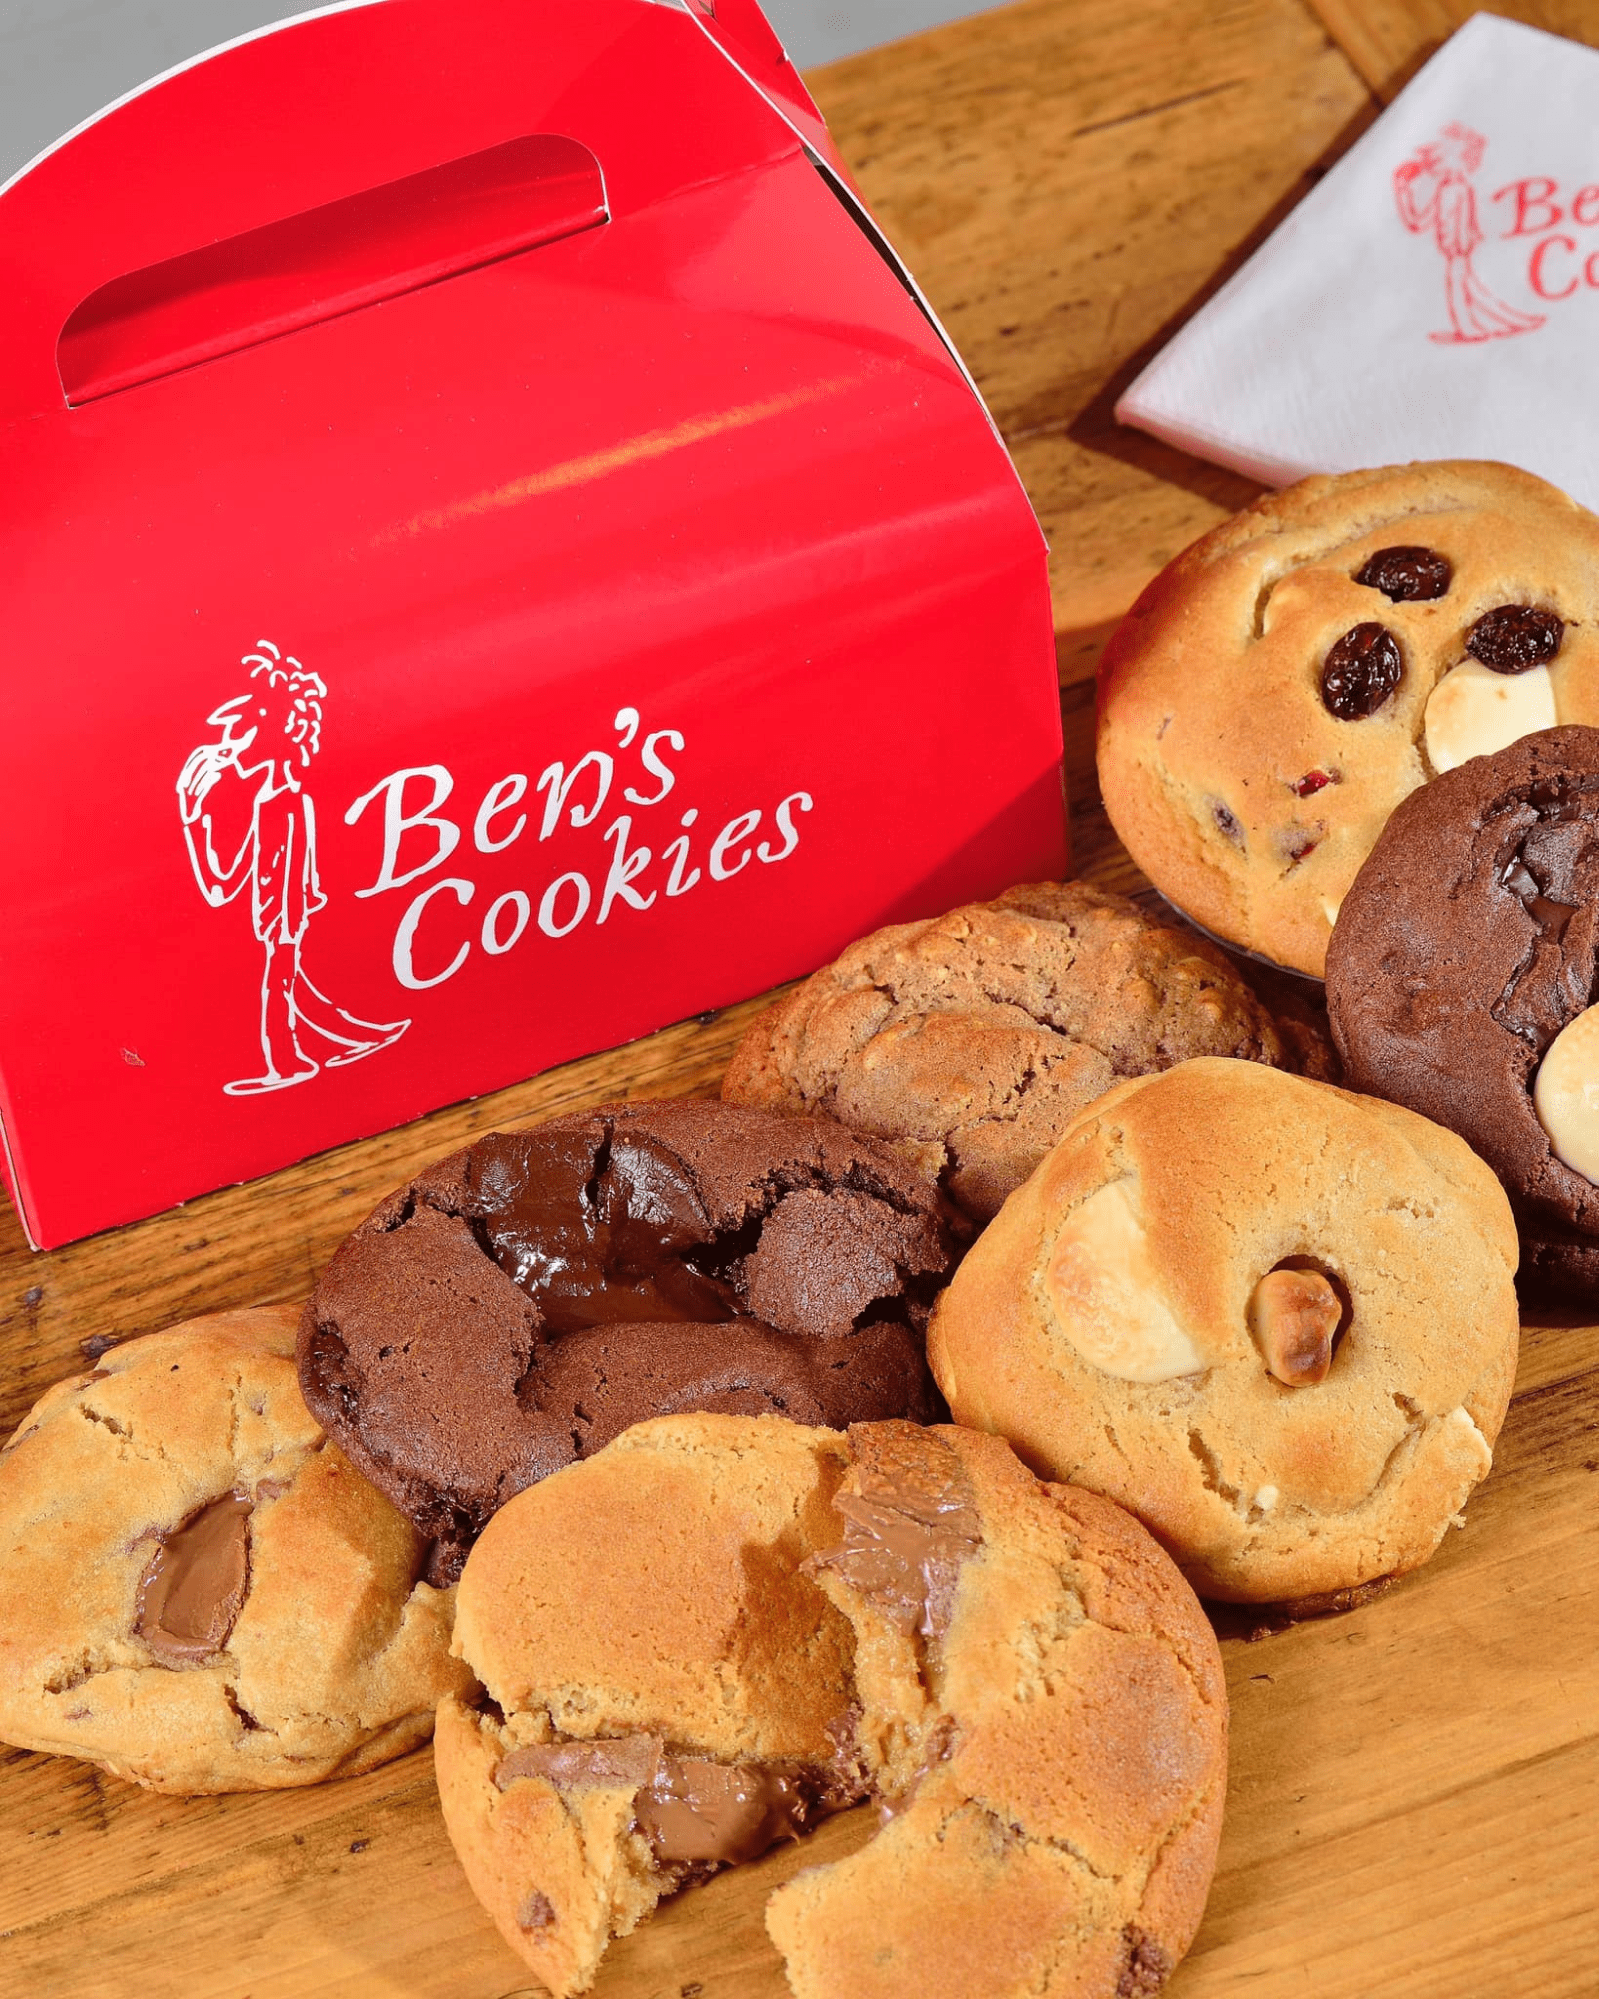 New Cafes July - Bens Cookies